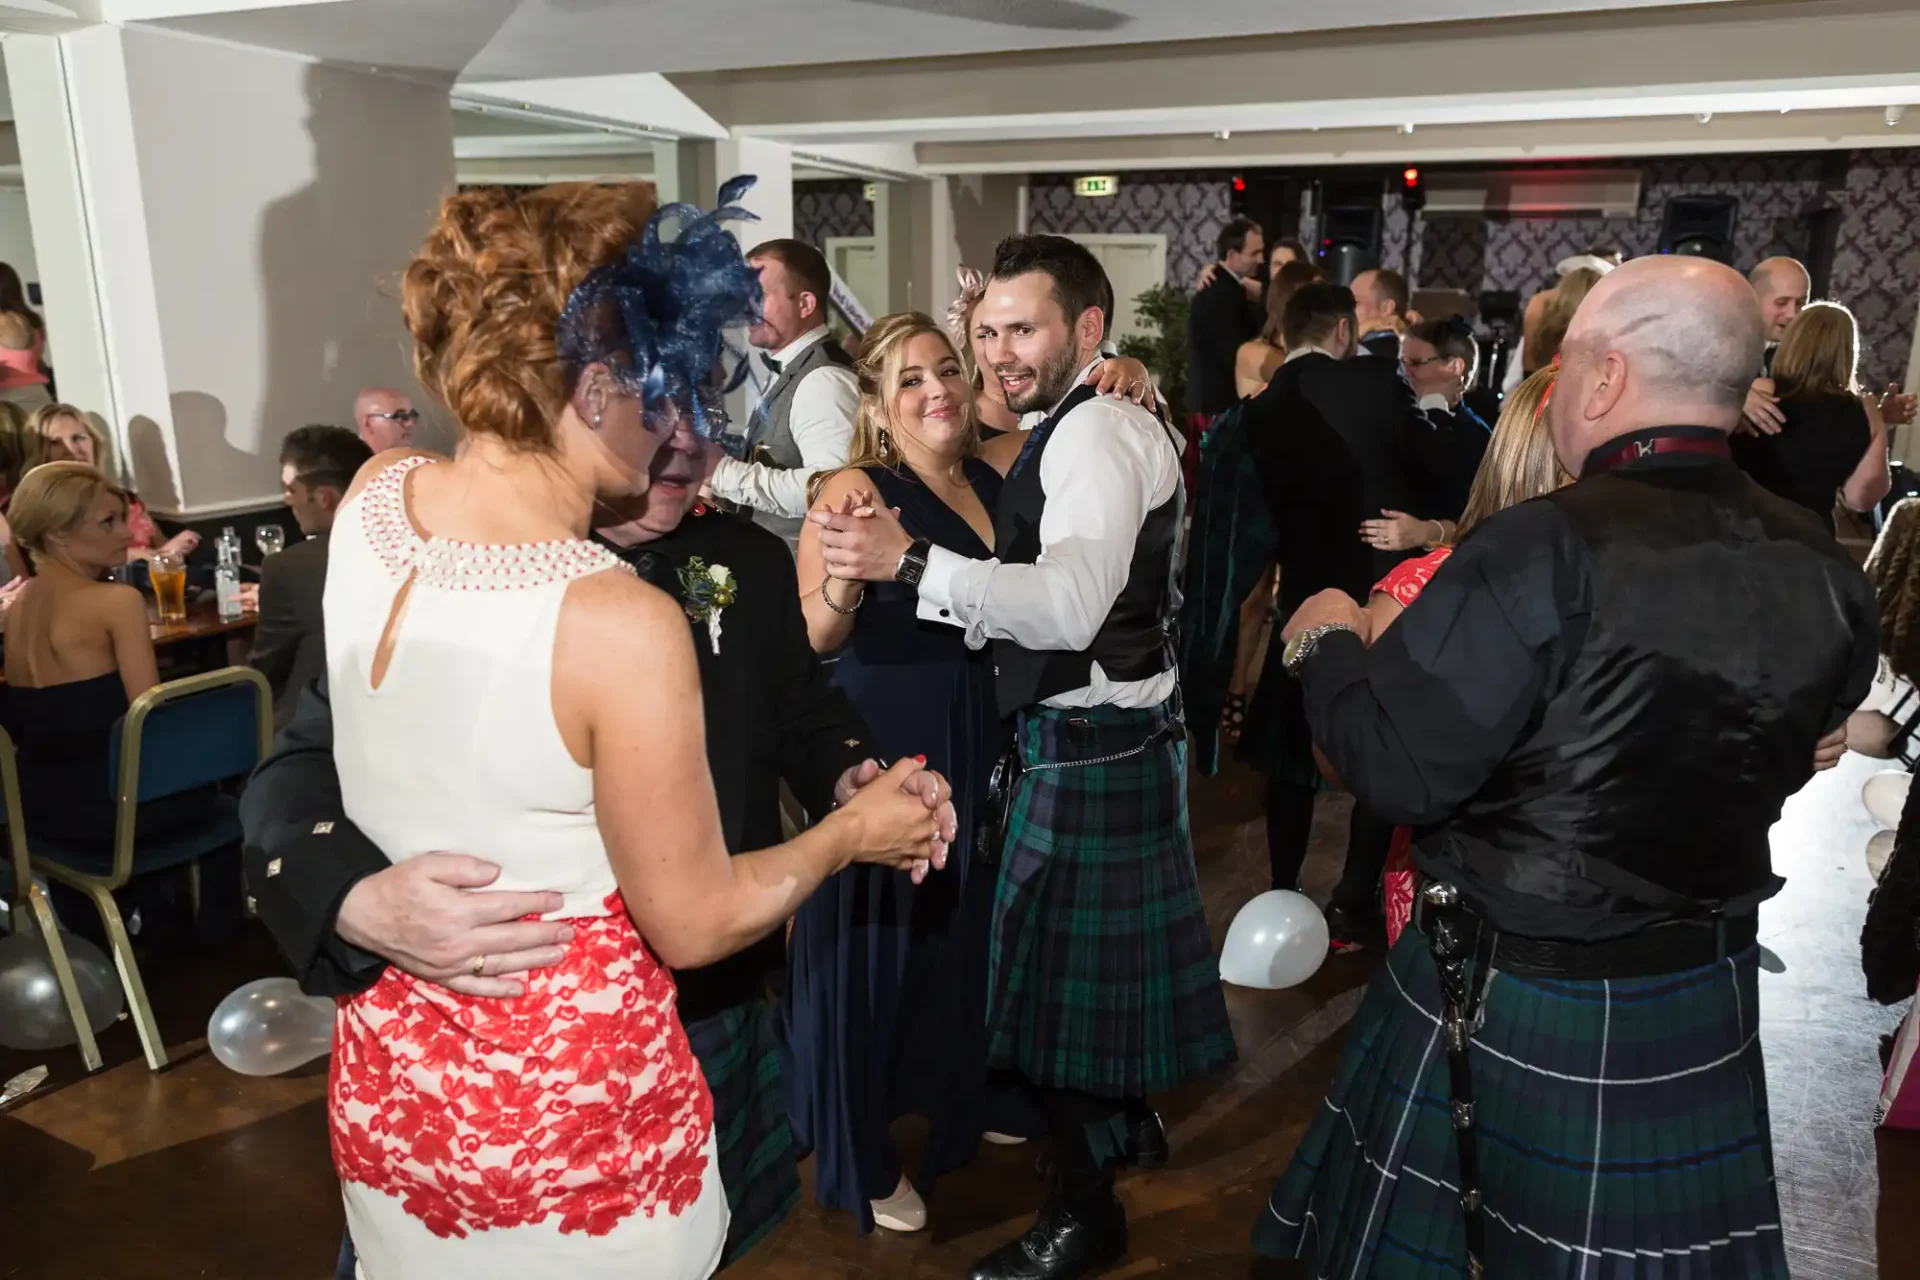 People in formal attire, including kilts, dancing at an indoor celebration with balloons and festive decor.